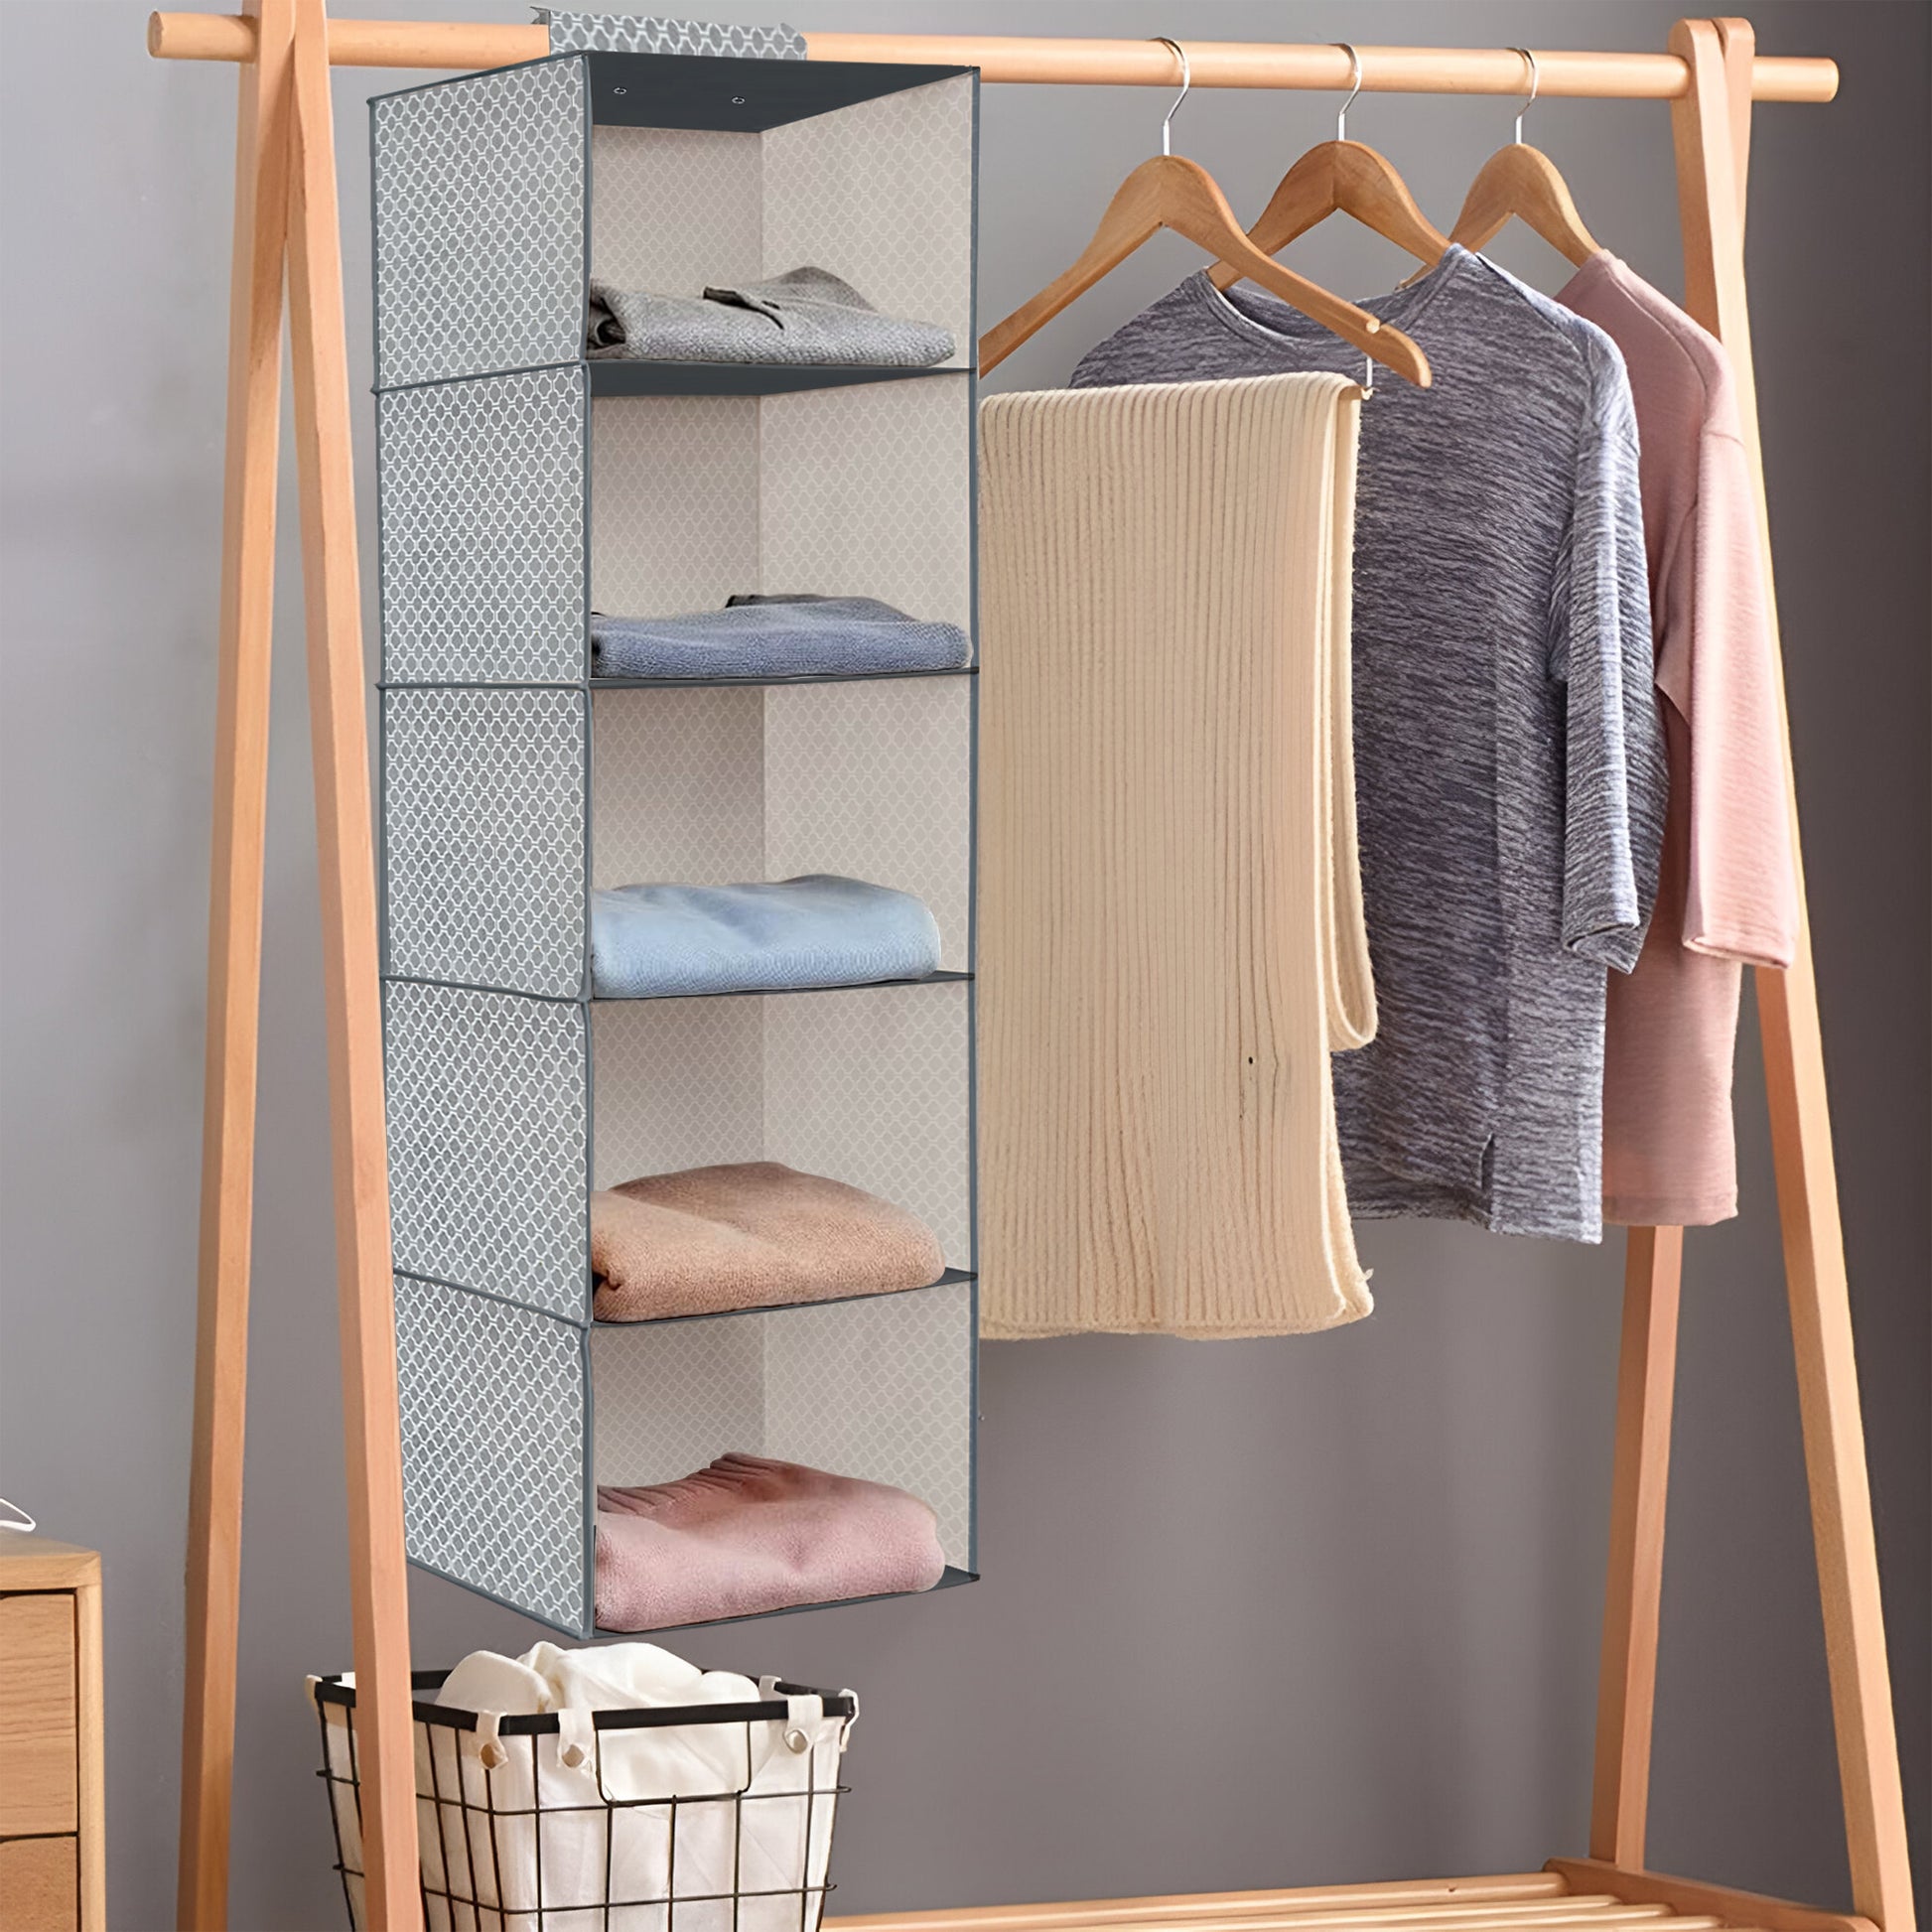 wardrobe with shelves